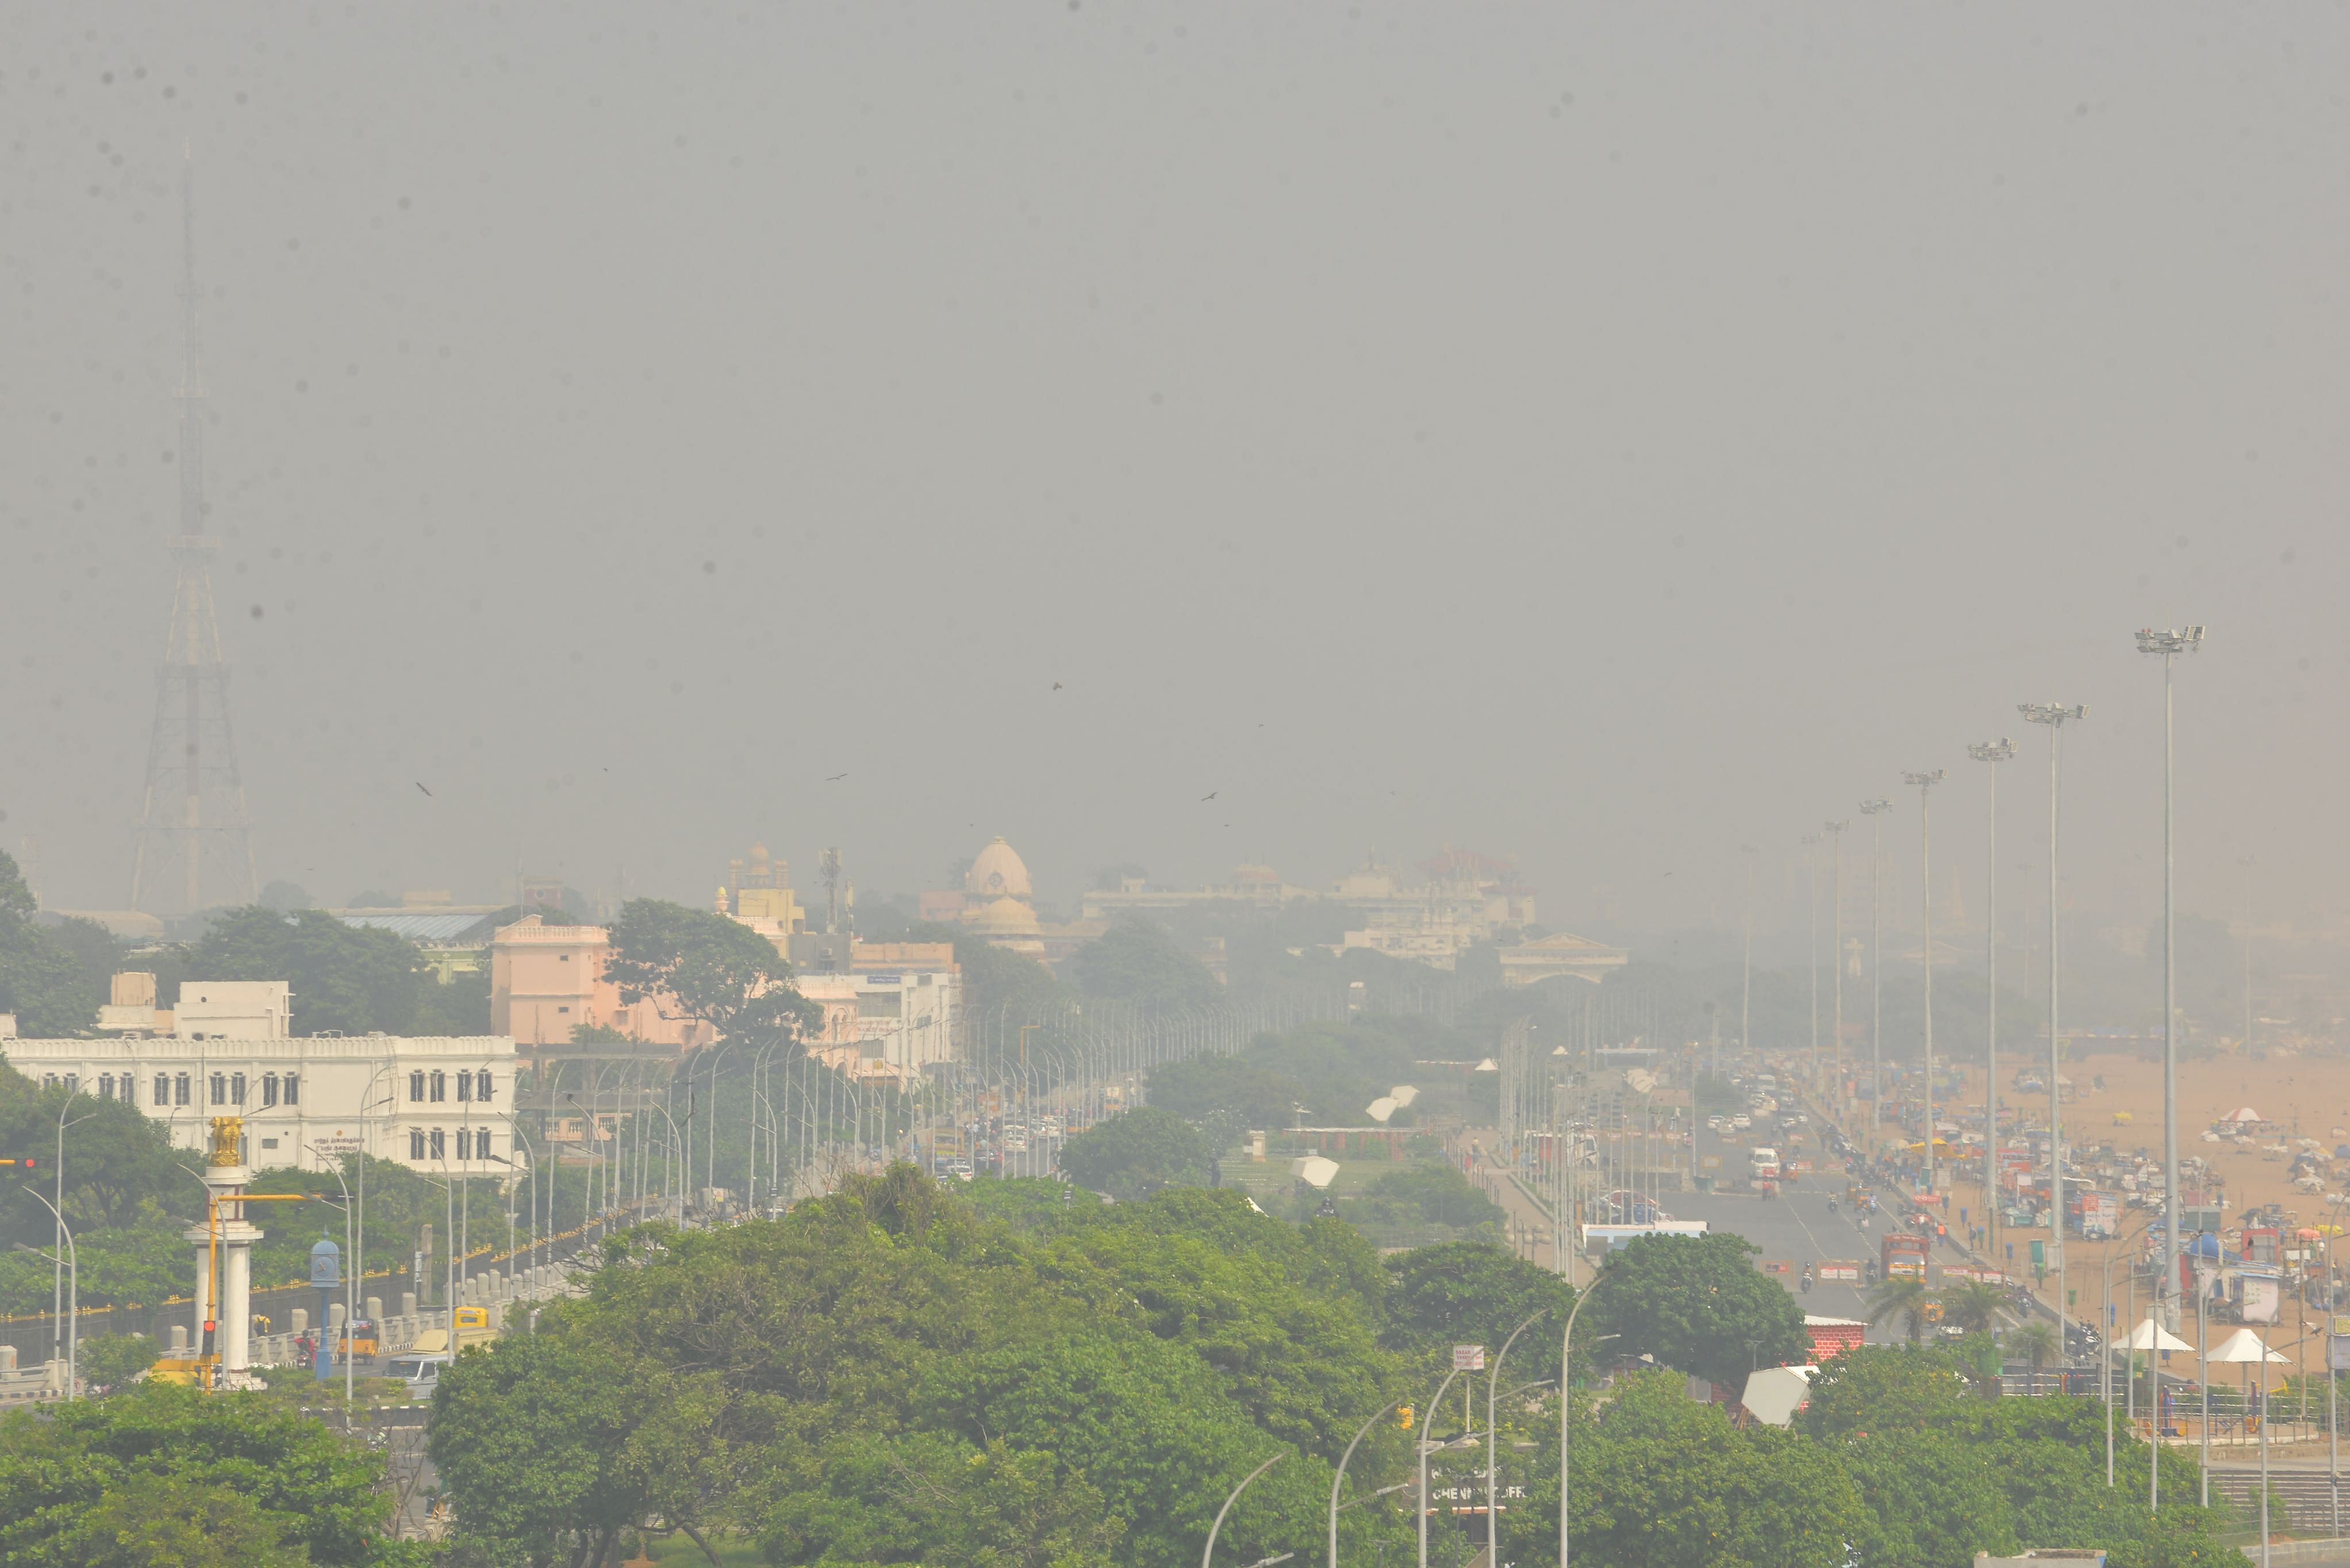 The Marina Beach being covered under smog on Monday. (DH photo)